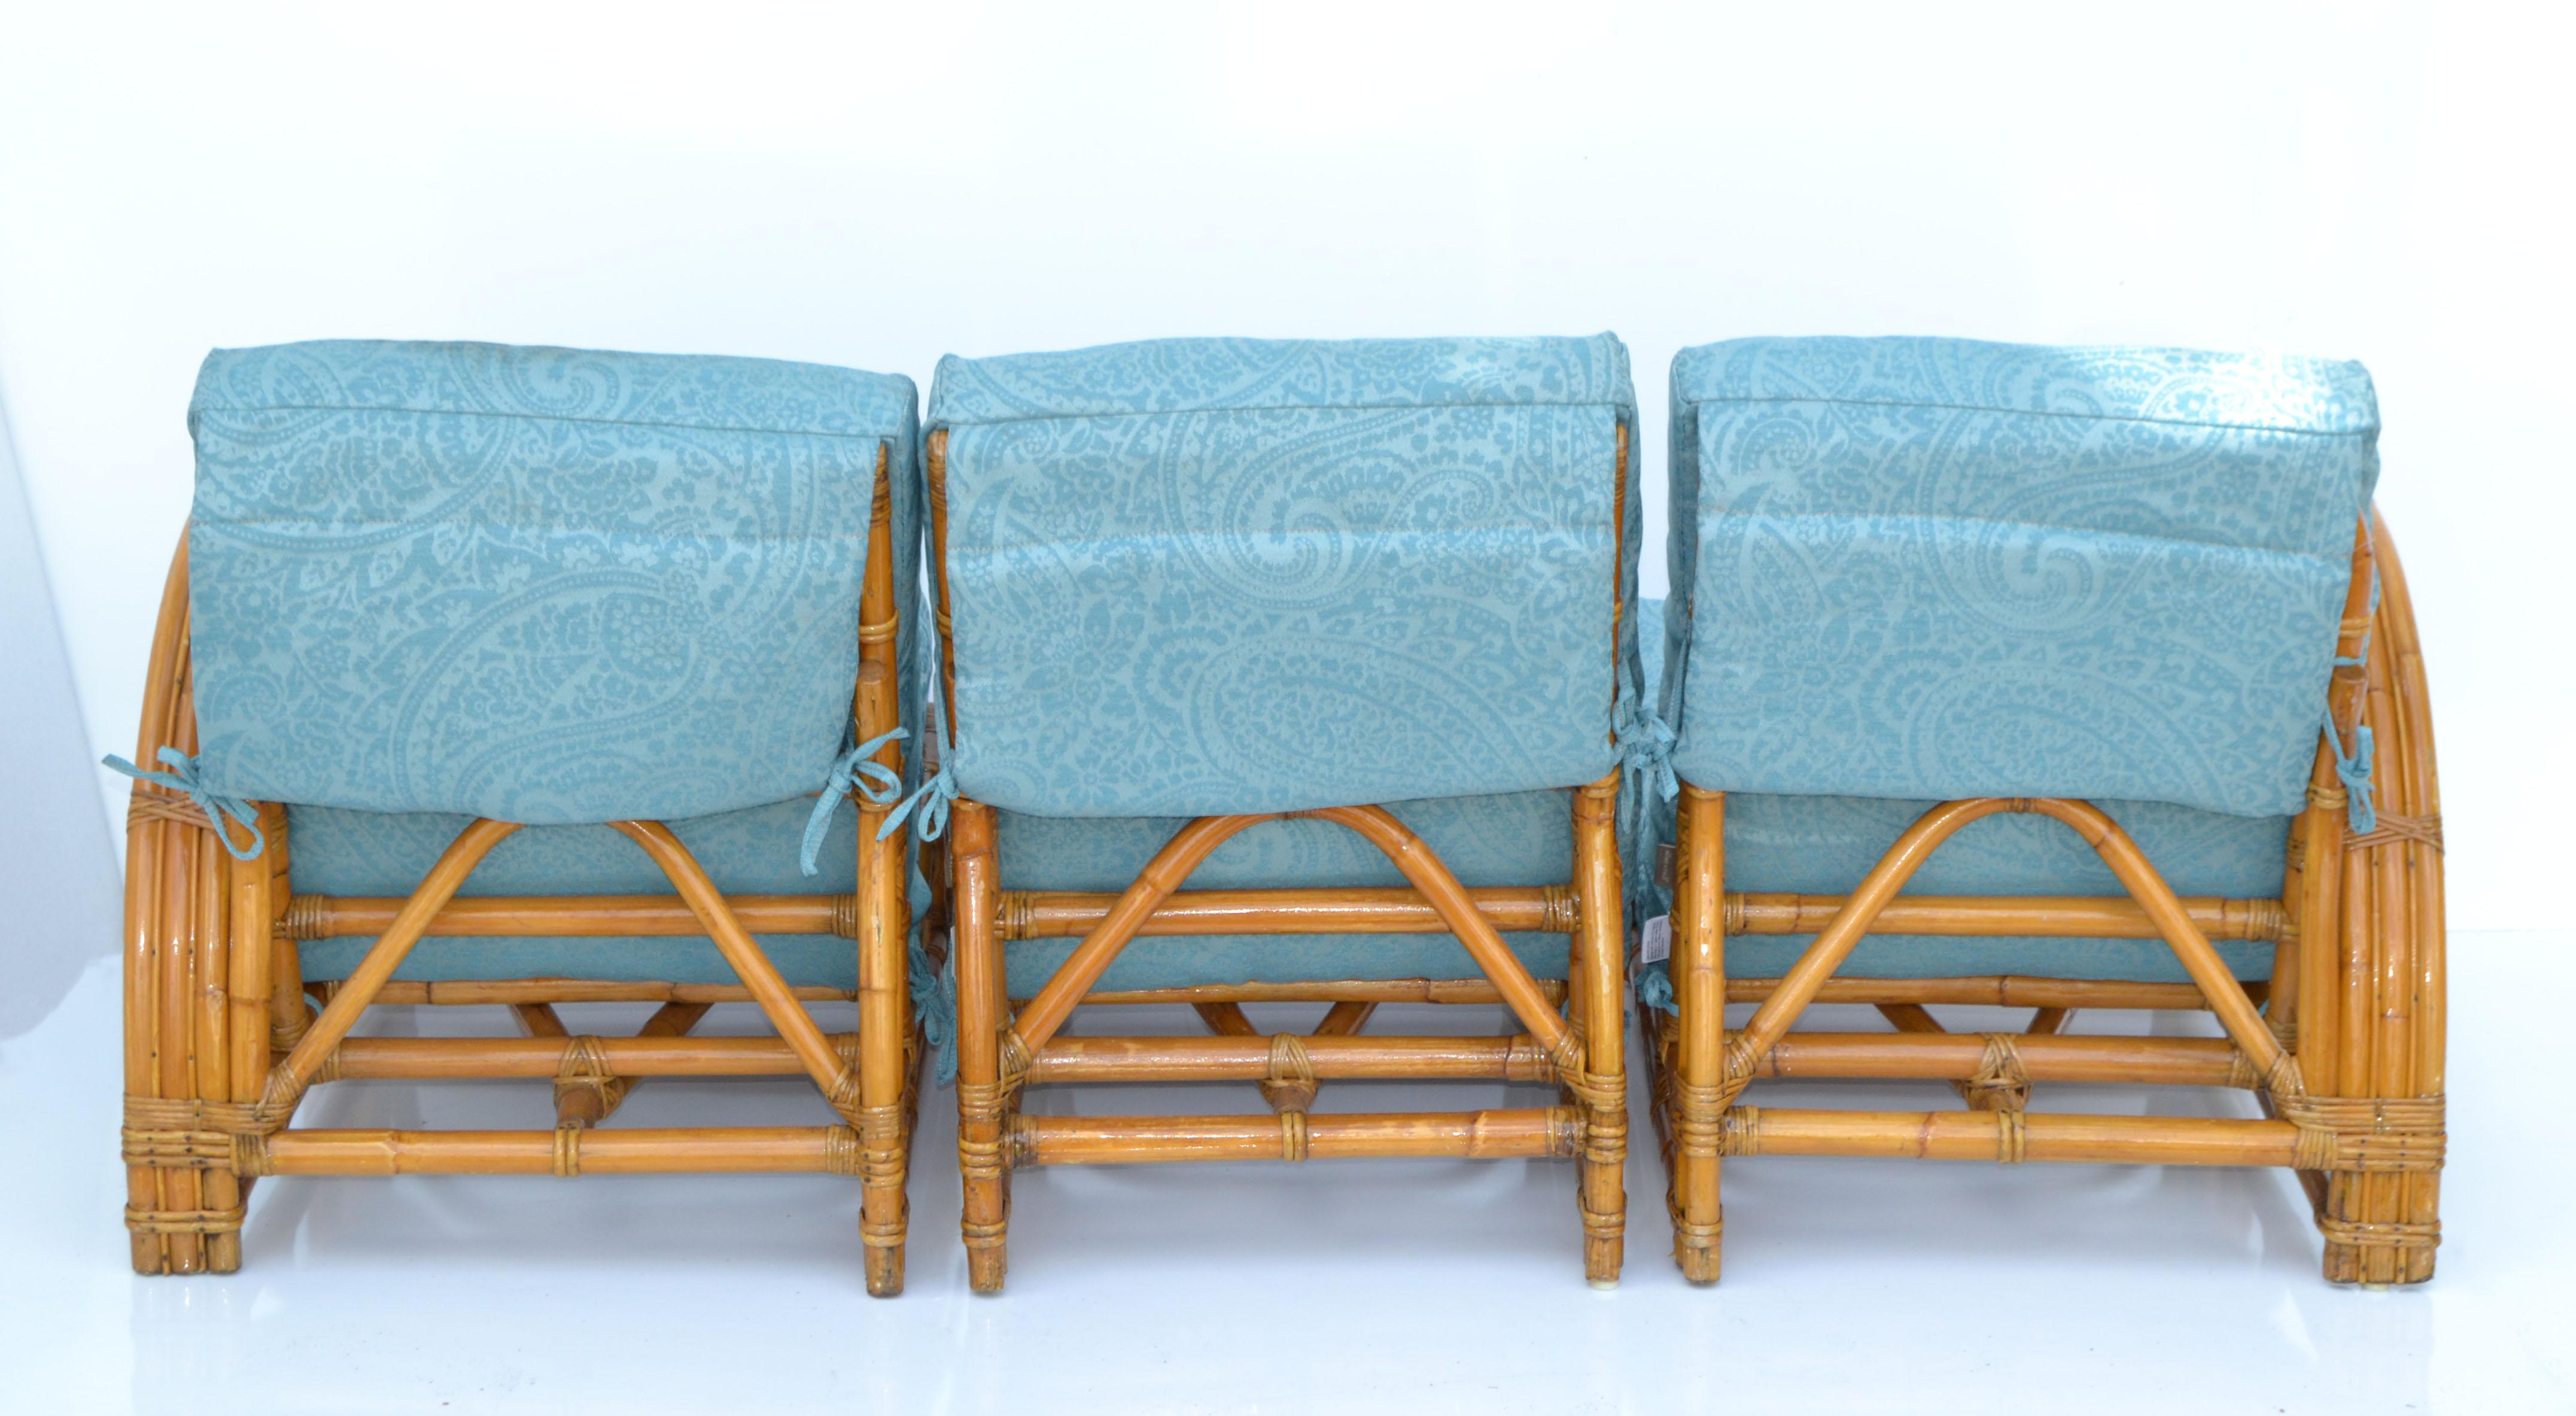 Fabric Calif Asia 4 Piece Seating Set Bamboo Sofa & Lounge Chair Turquoise Upholstery